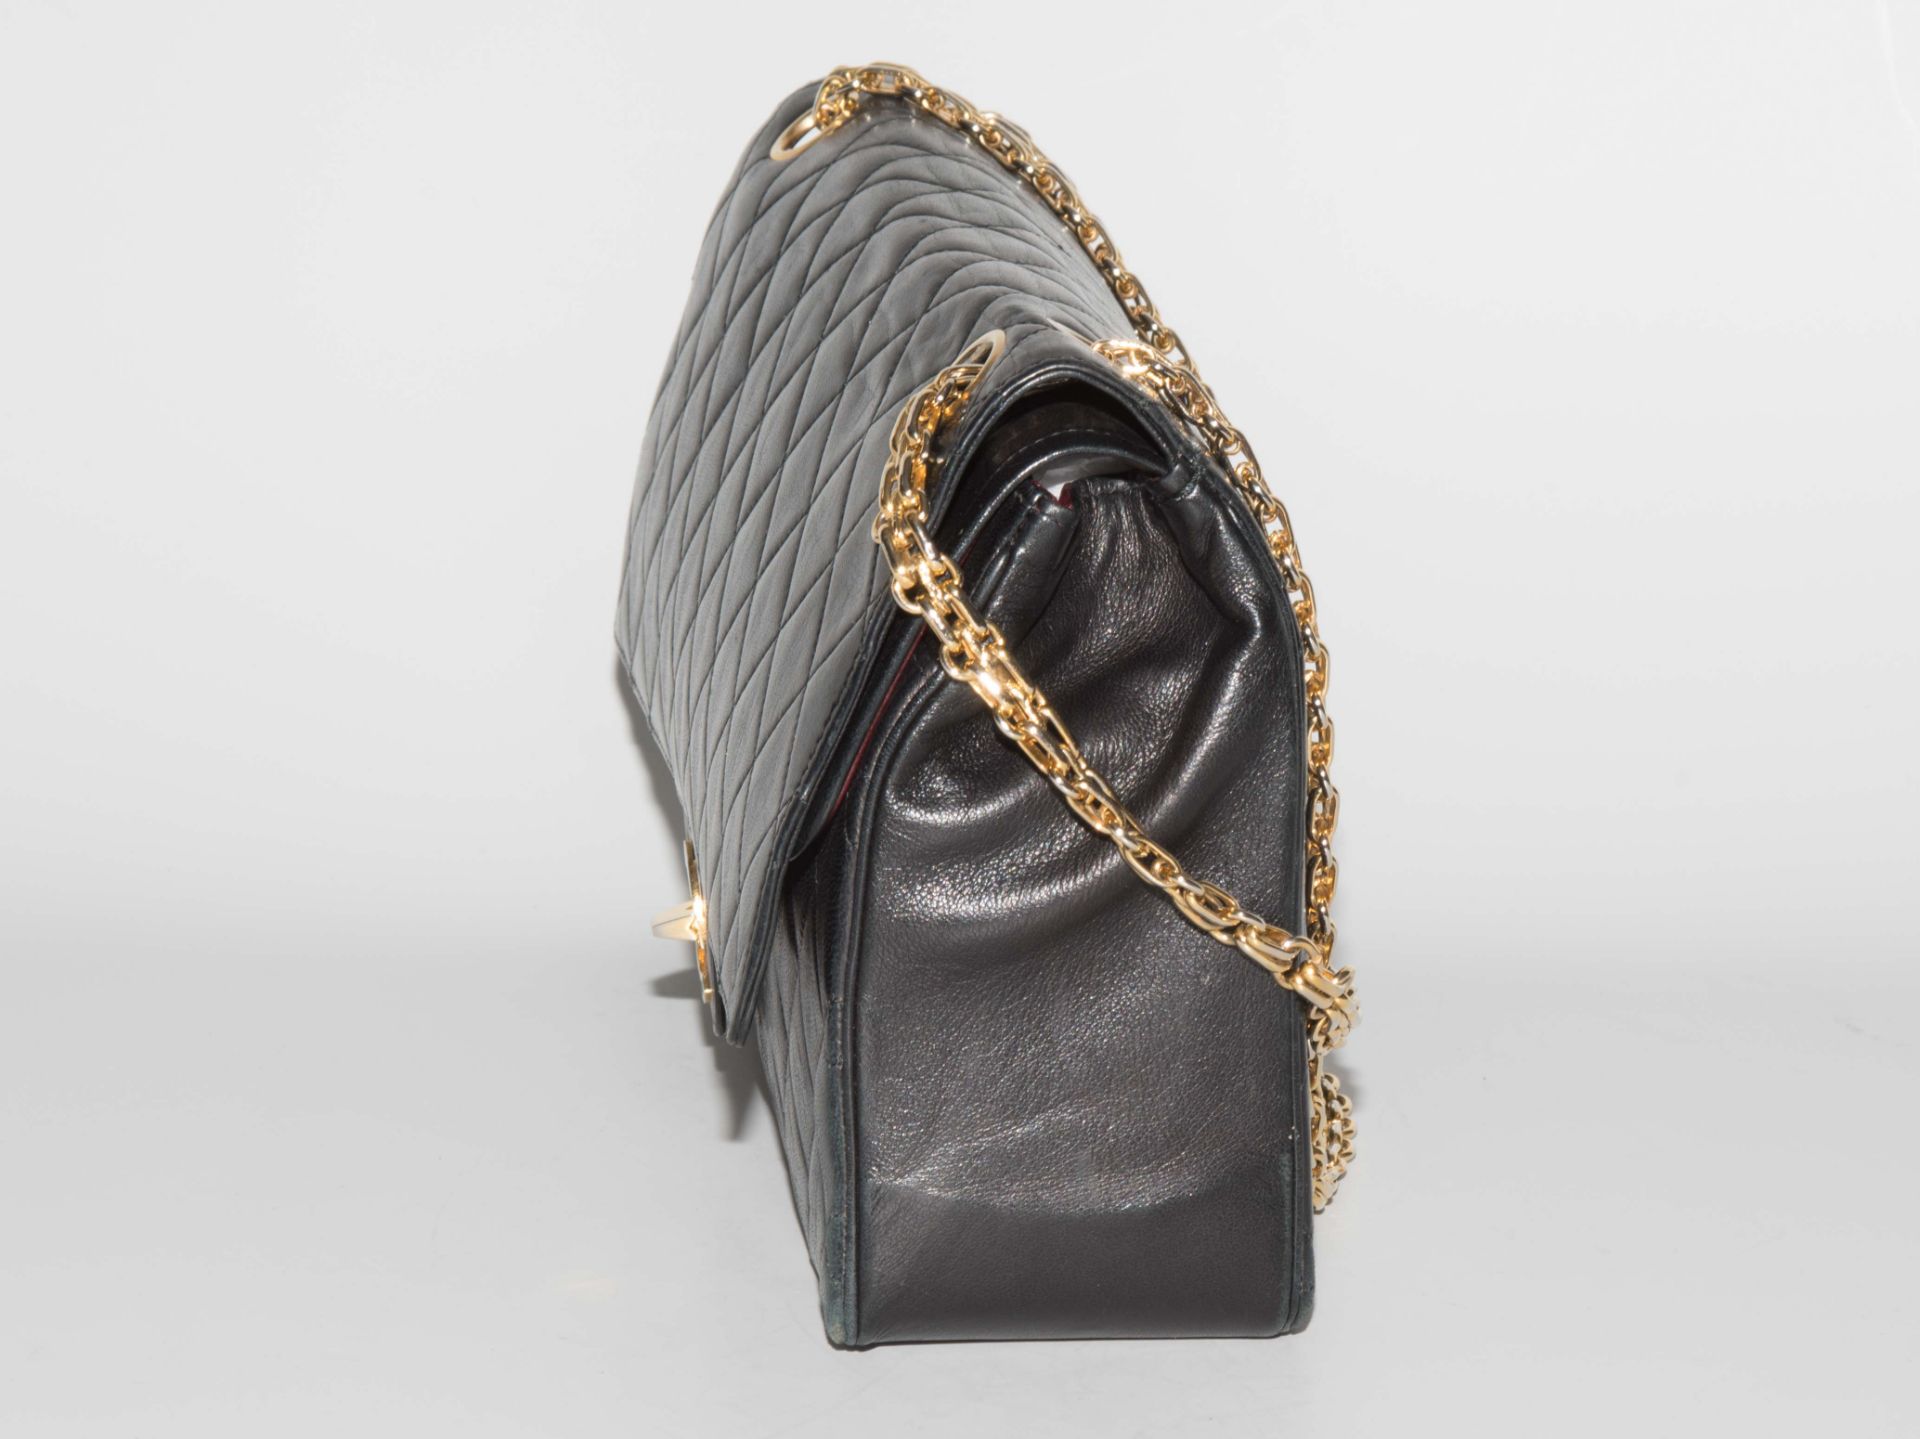 Chanel, Handtasche "Timeless" - Image 3 of 15